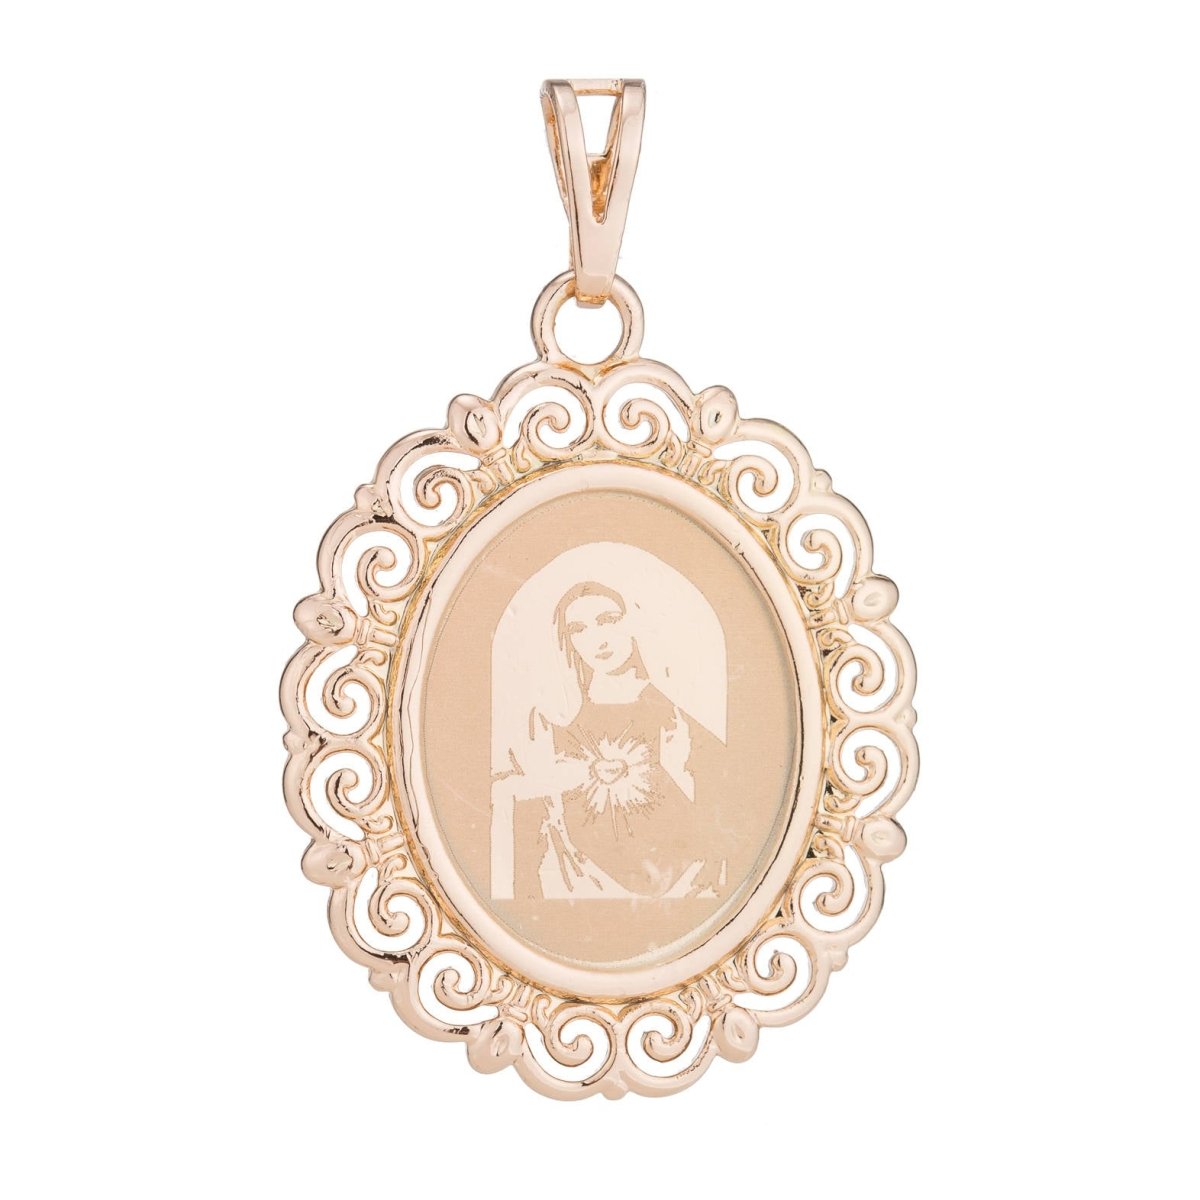 Gold Virgin Mary Pendant with Decorative Edges in 18k Gold Filled Medallion Charm for Layer Necklace Religious Jewelry Making supply - DLUXCA